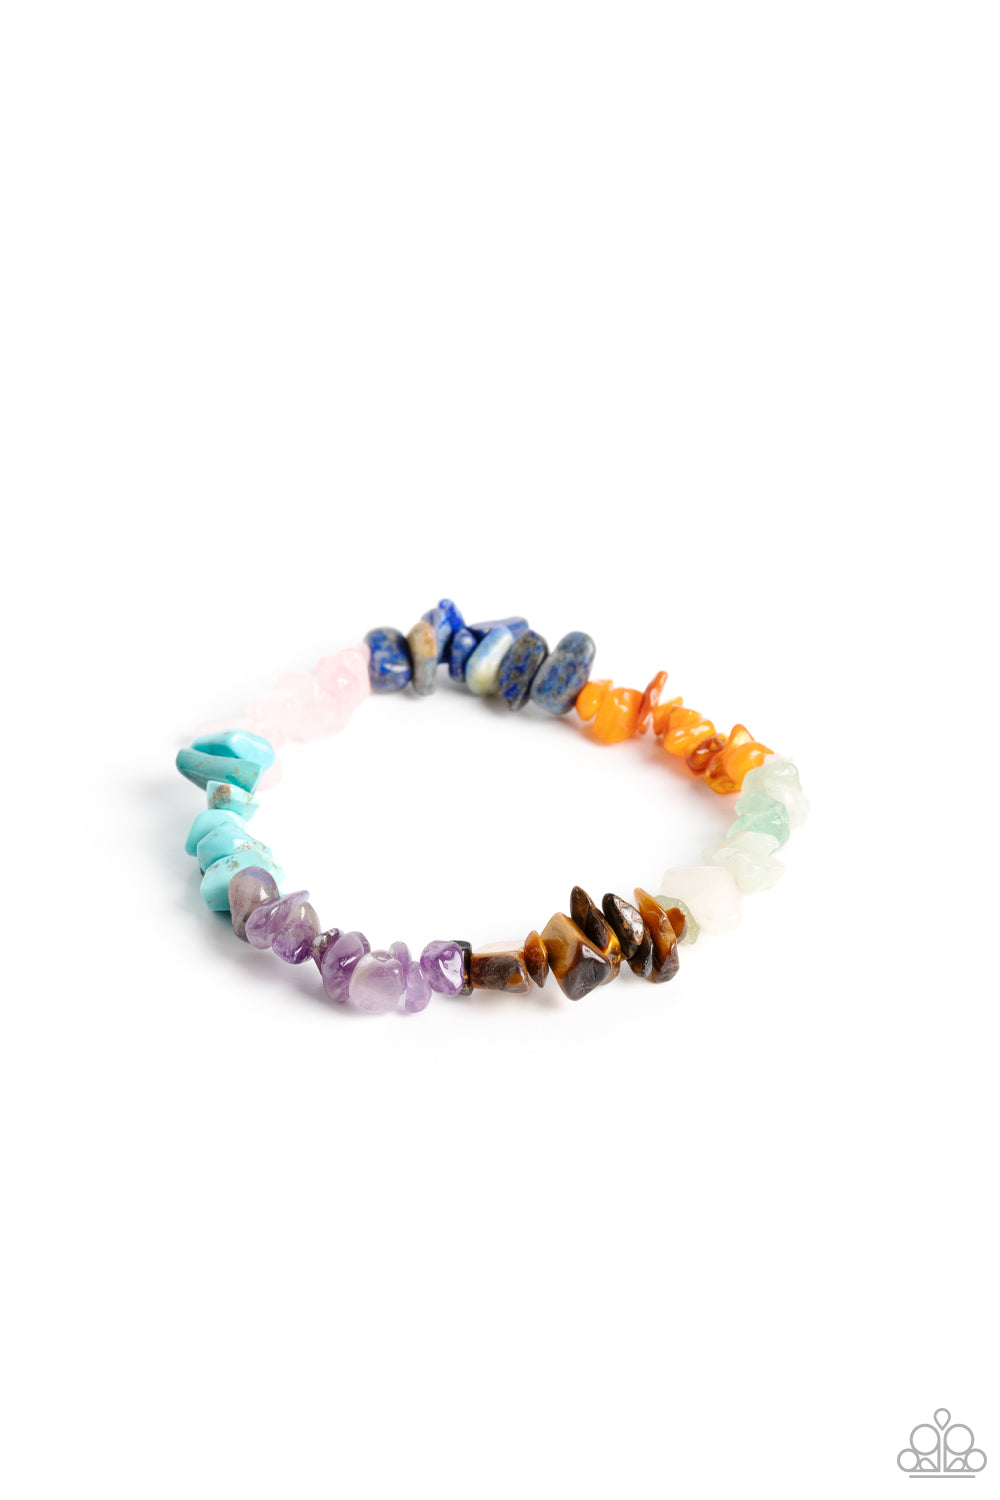 Paparazzi Accessories - Pebble Plains - Multi Bracelets an earthy collection of turquoise, lapis, jade, amethyst, Tiger's eye, orange, gray, and pink pebbles are threaded along a stretchy band around the wrist for a Southwestern finish.  Sold as one individual bracelet.